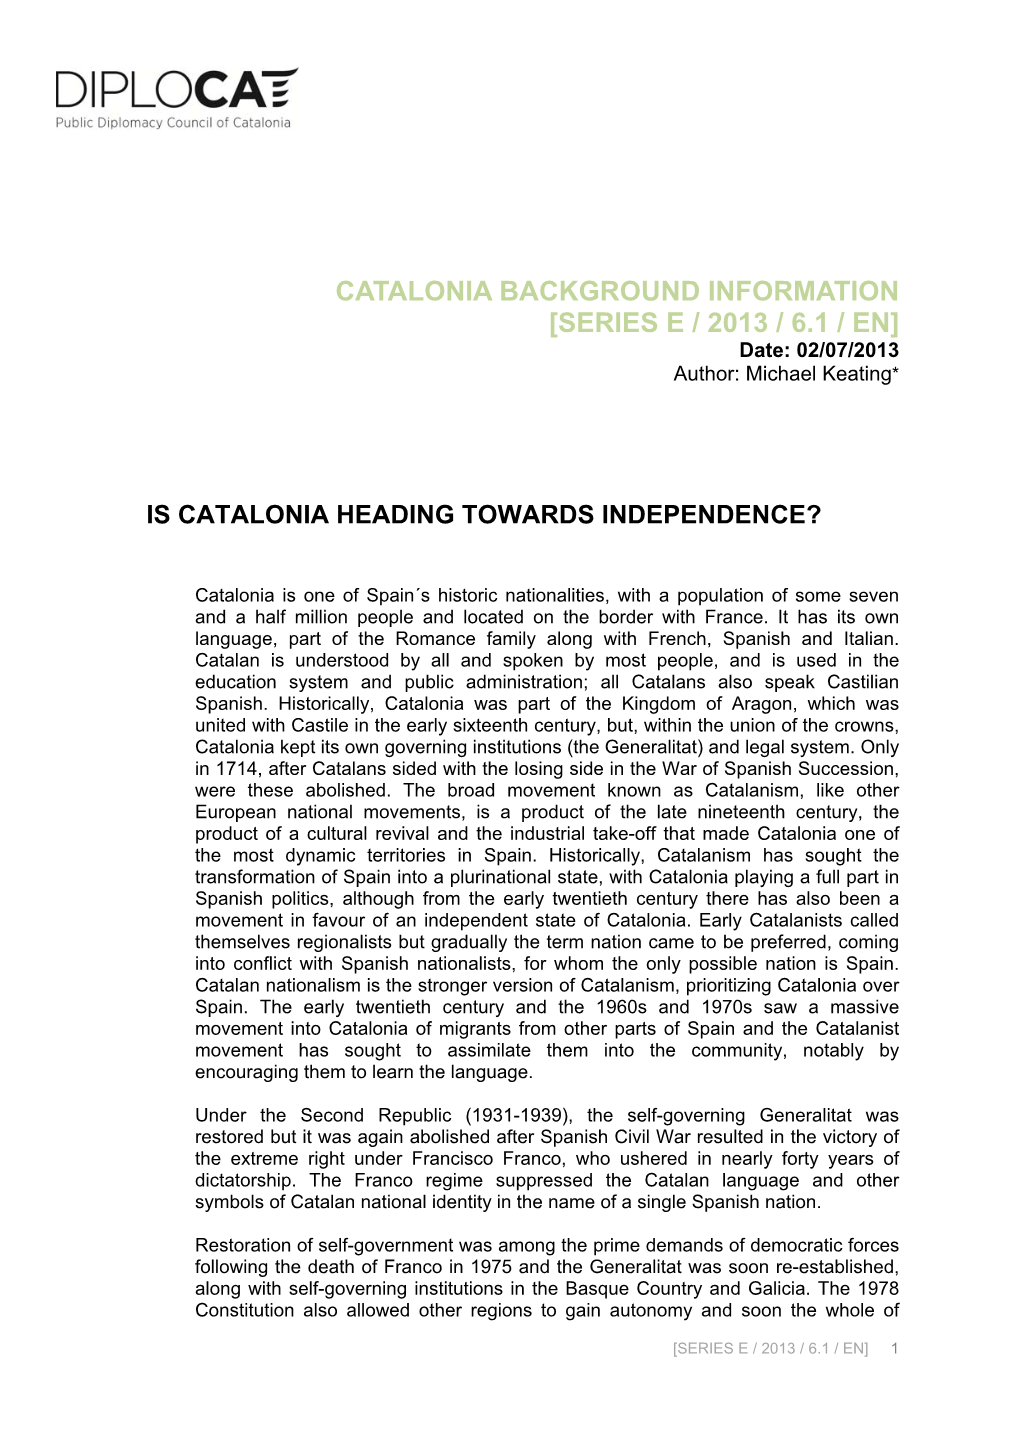 CATALONIA BACKGROUND INFORMATION [SERIES E / 2013 / 6.1 / EN] Date: 02/07/2013 Author: Michael Keating*